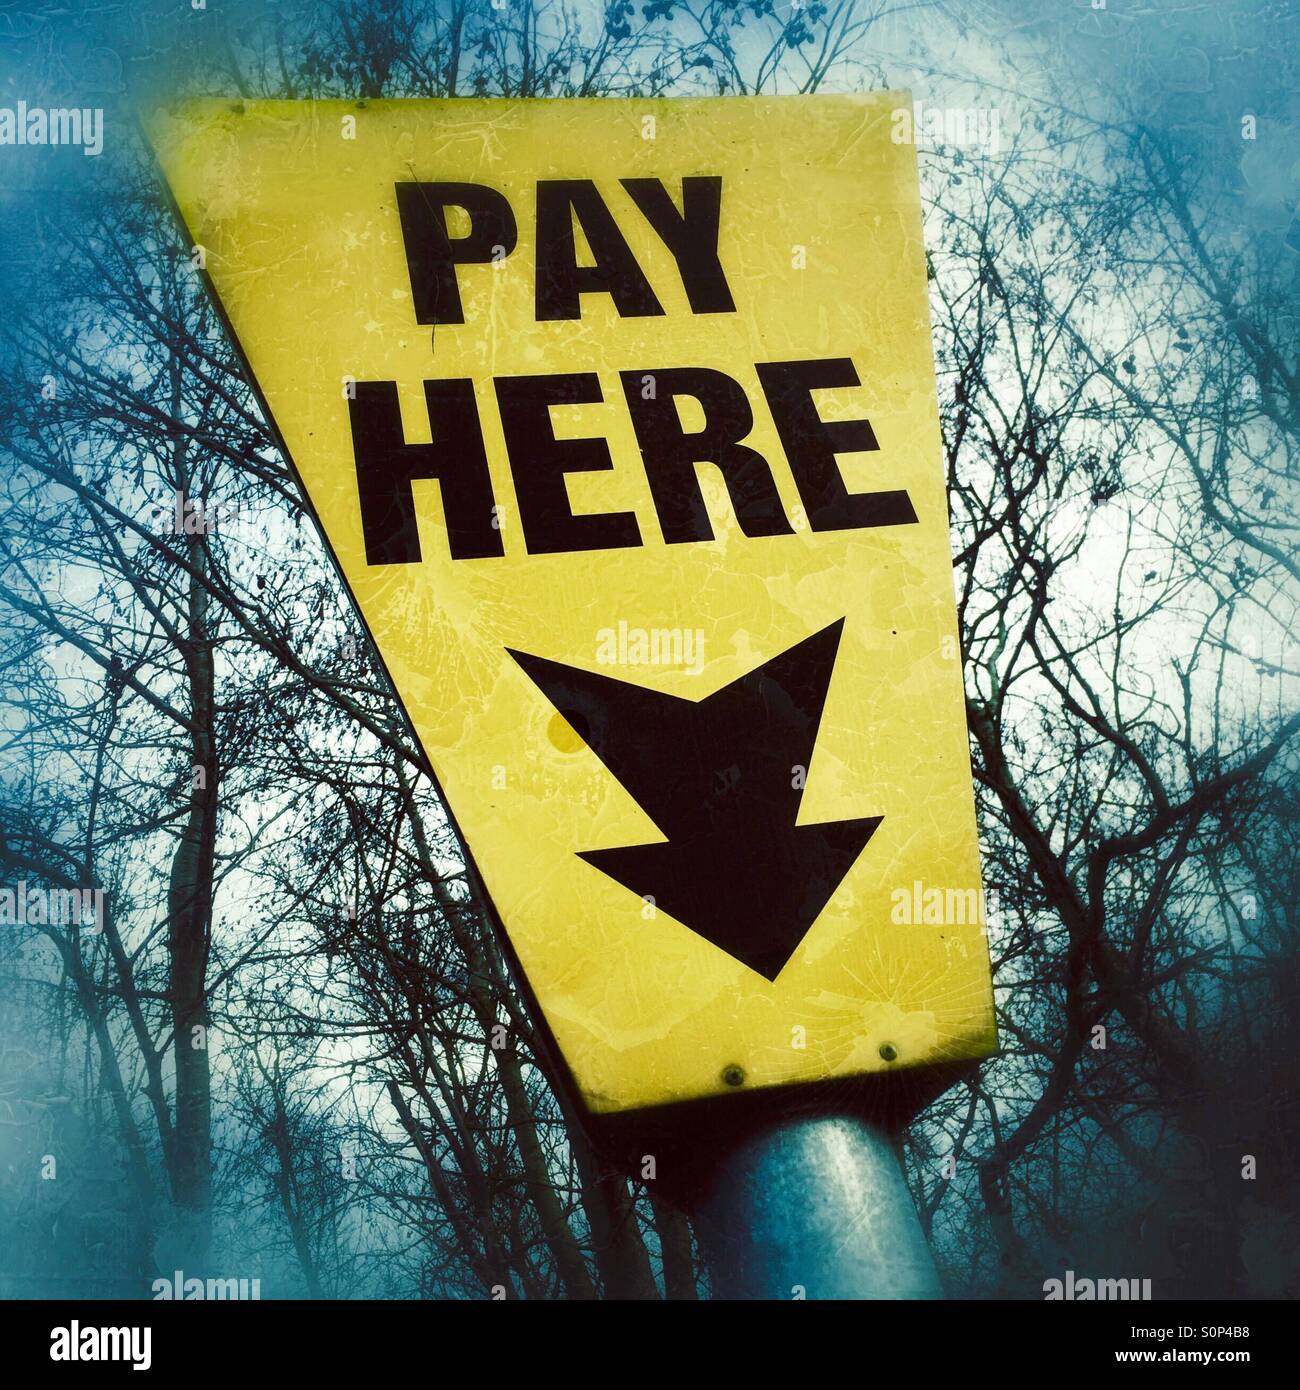 Pay here sign Stock Photo